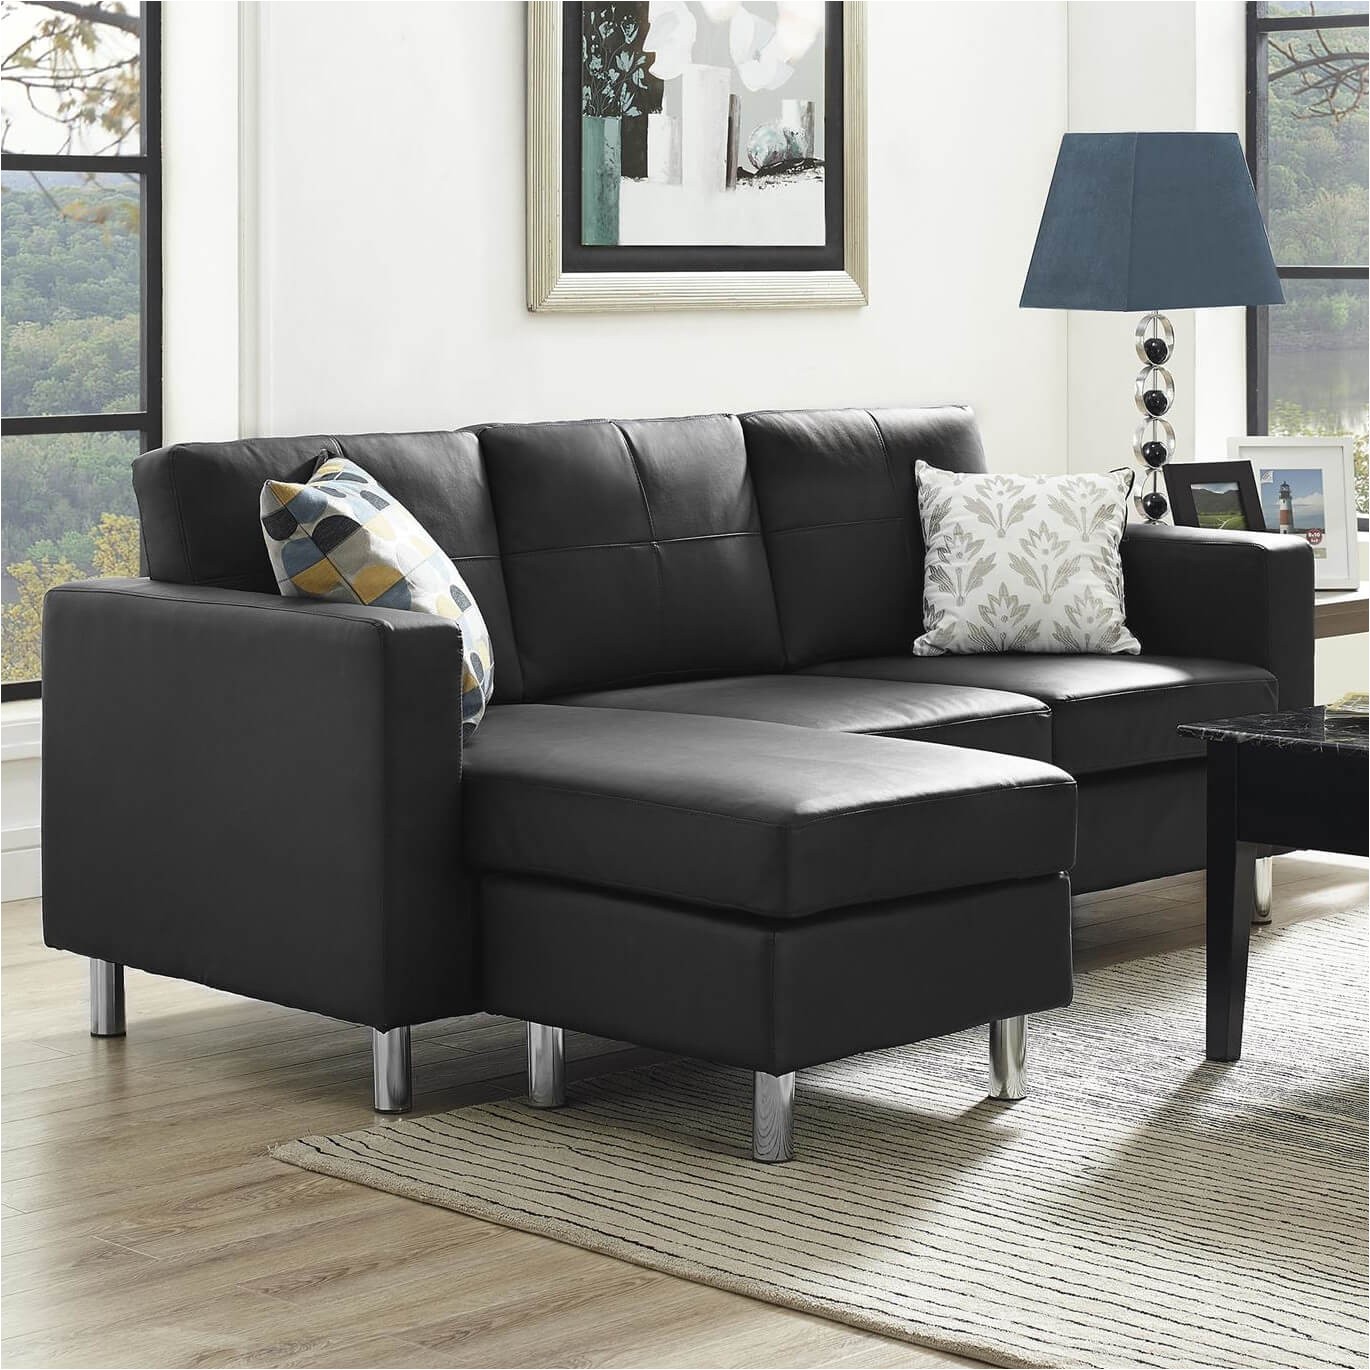 cheap sectional sofas under for cheap sectional sofas under 400